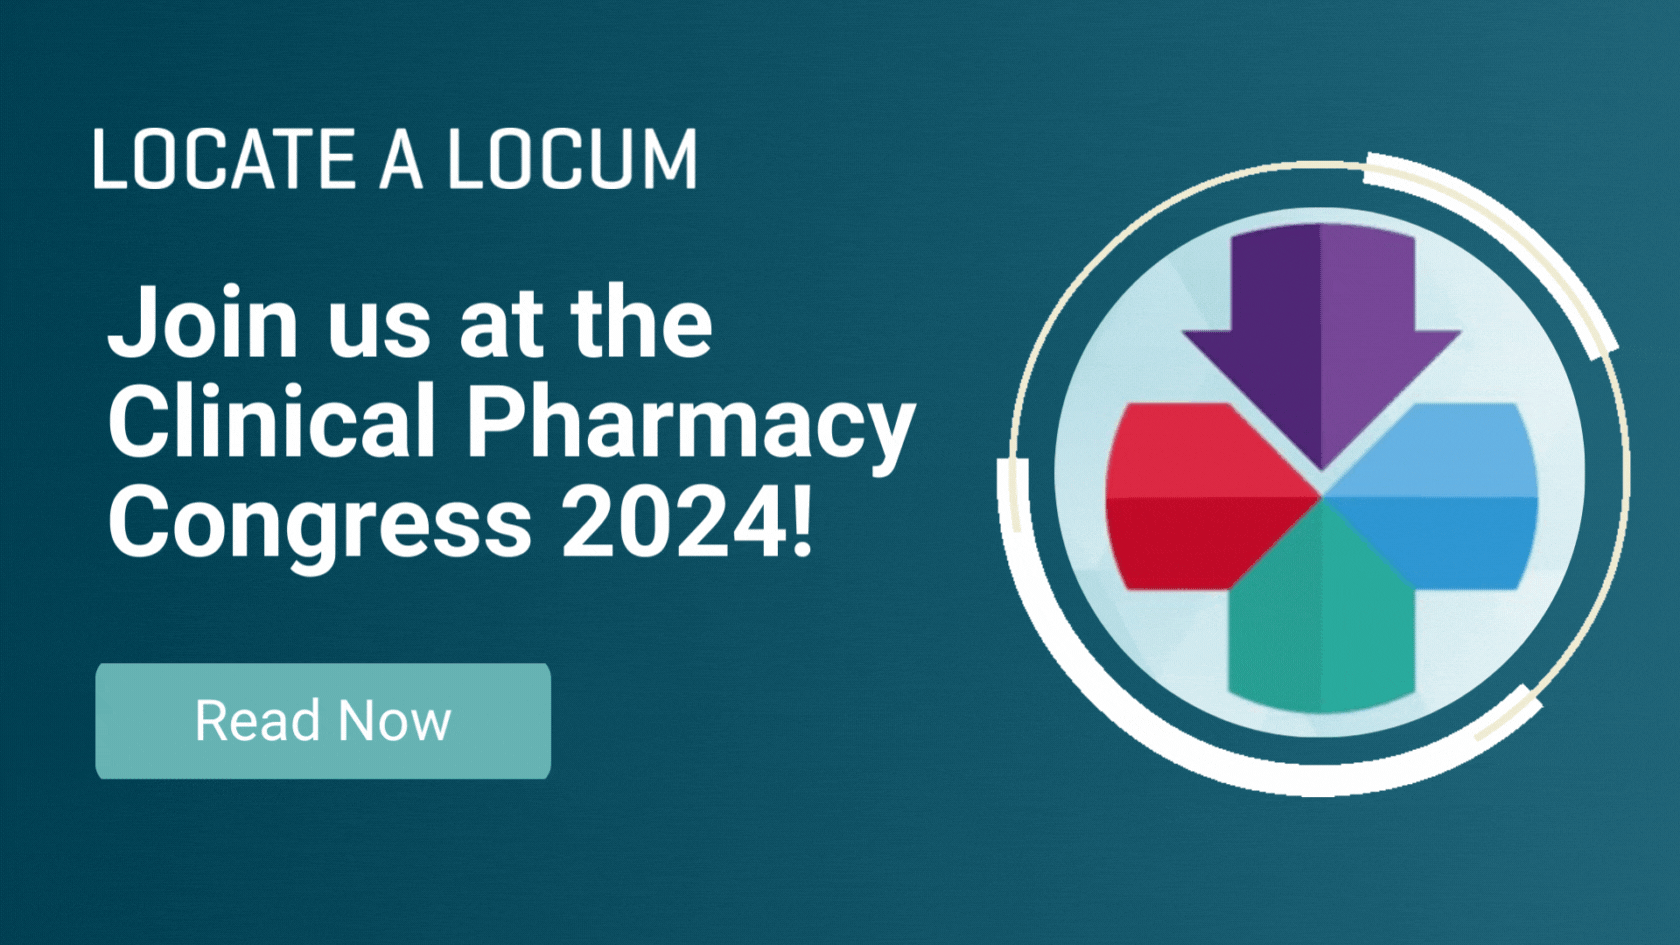 join-locate-a-locum-at-the-clinical-pharmacy-congress-2024